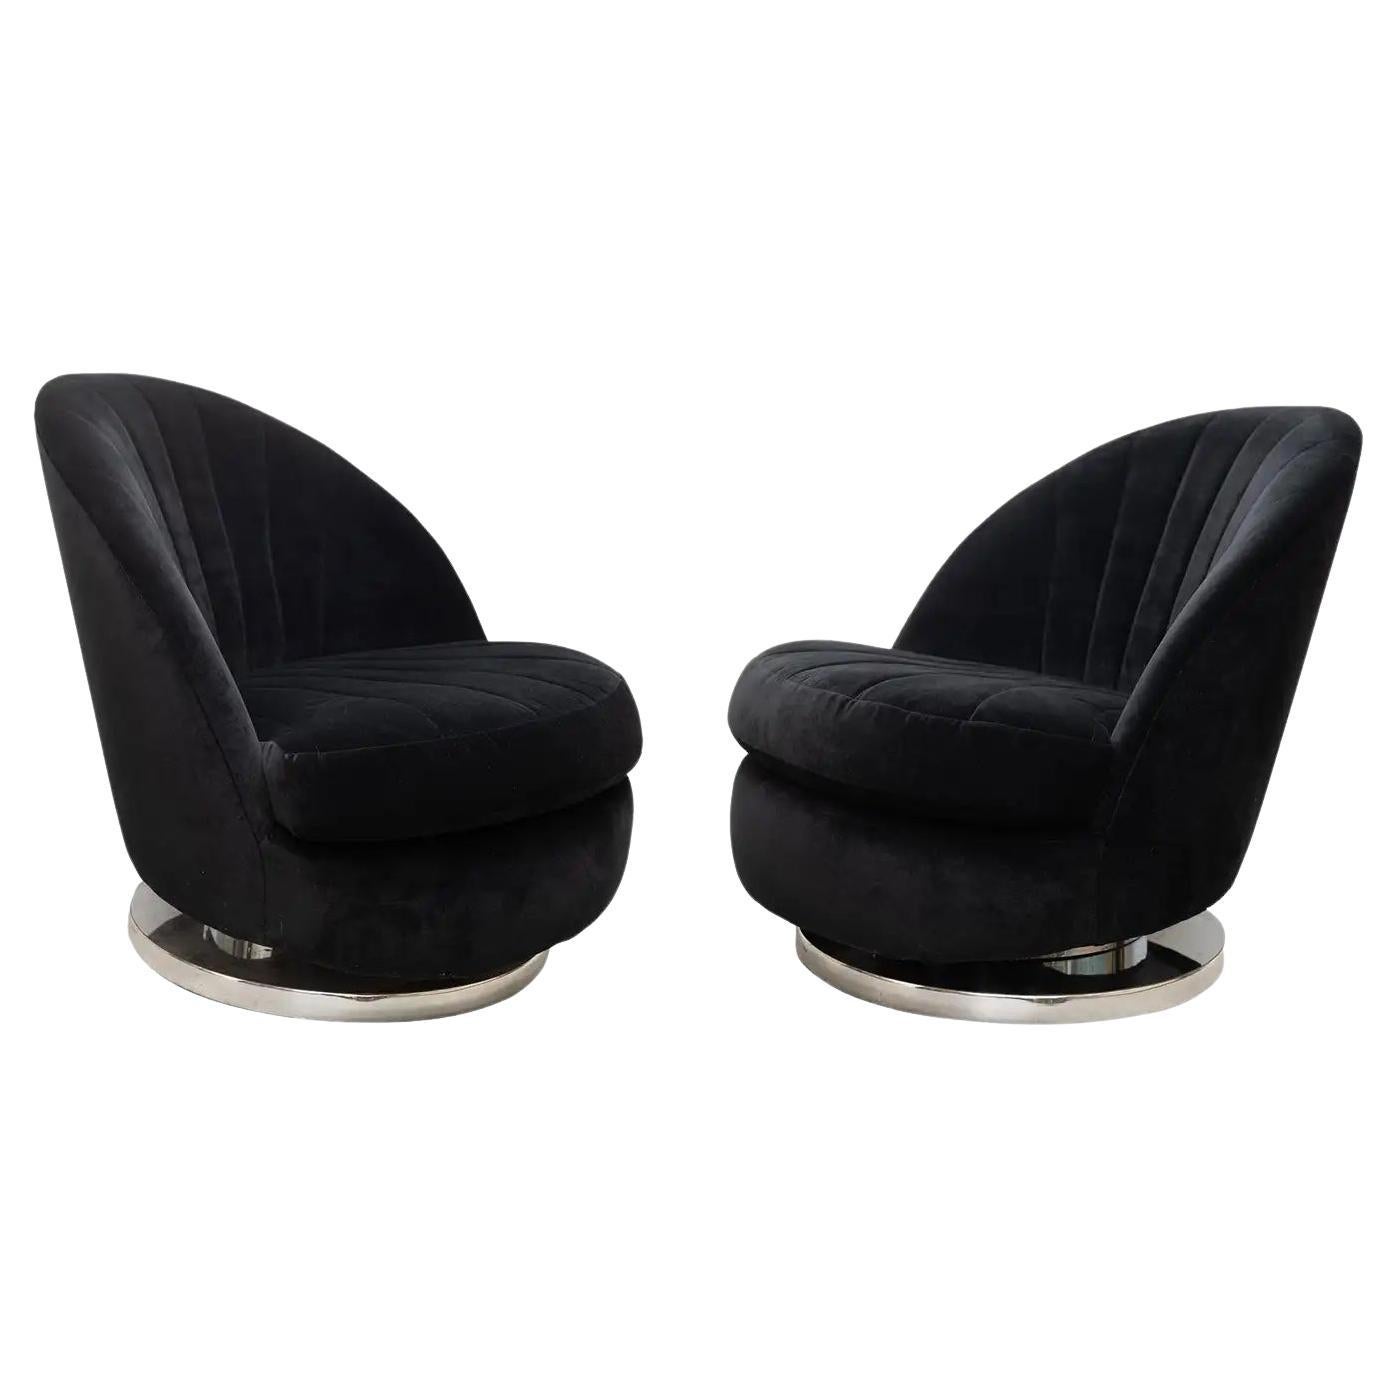 Pair Iconic Milo Baughman Swivel and Tilt Lounge Chairs in Black, Ca. 1975